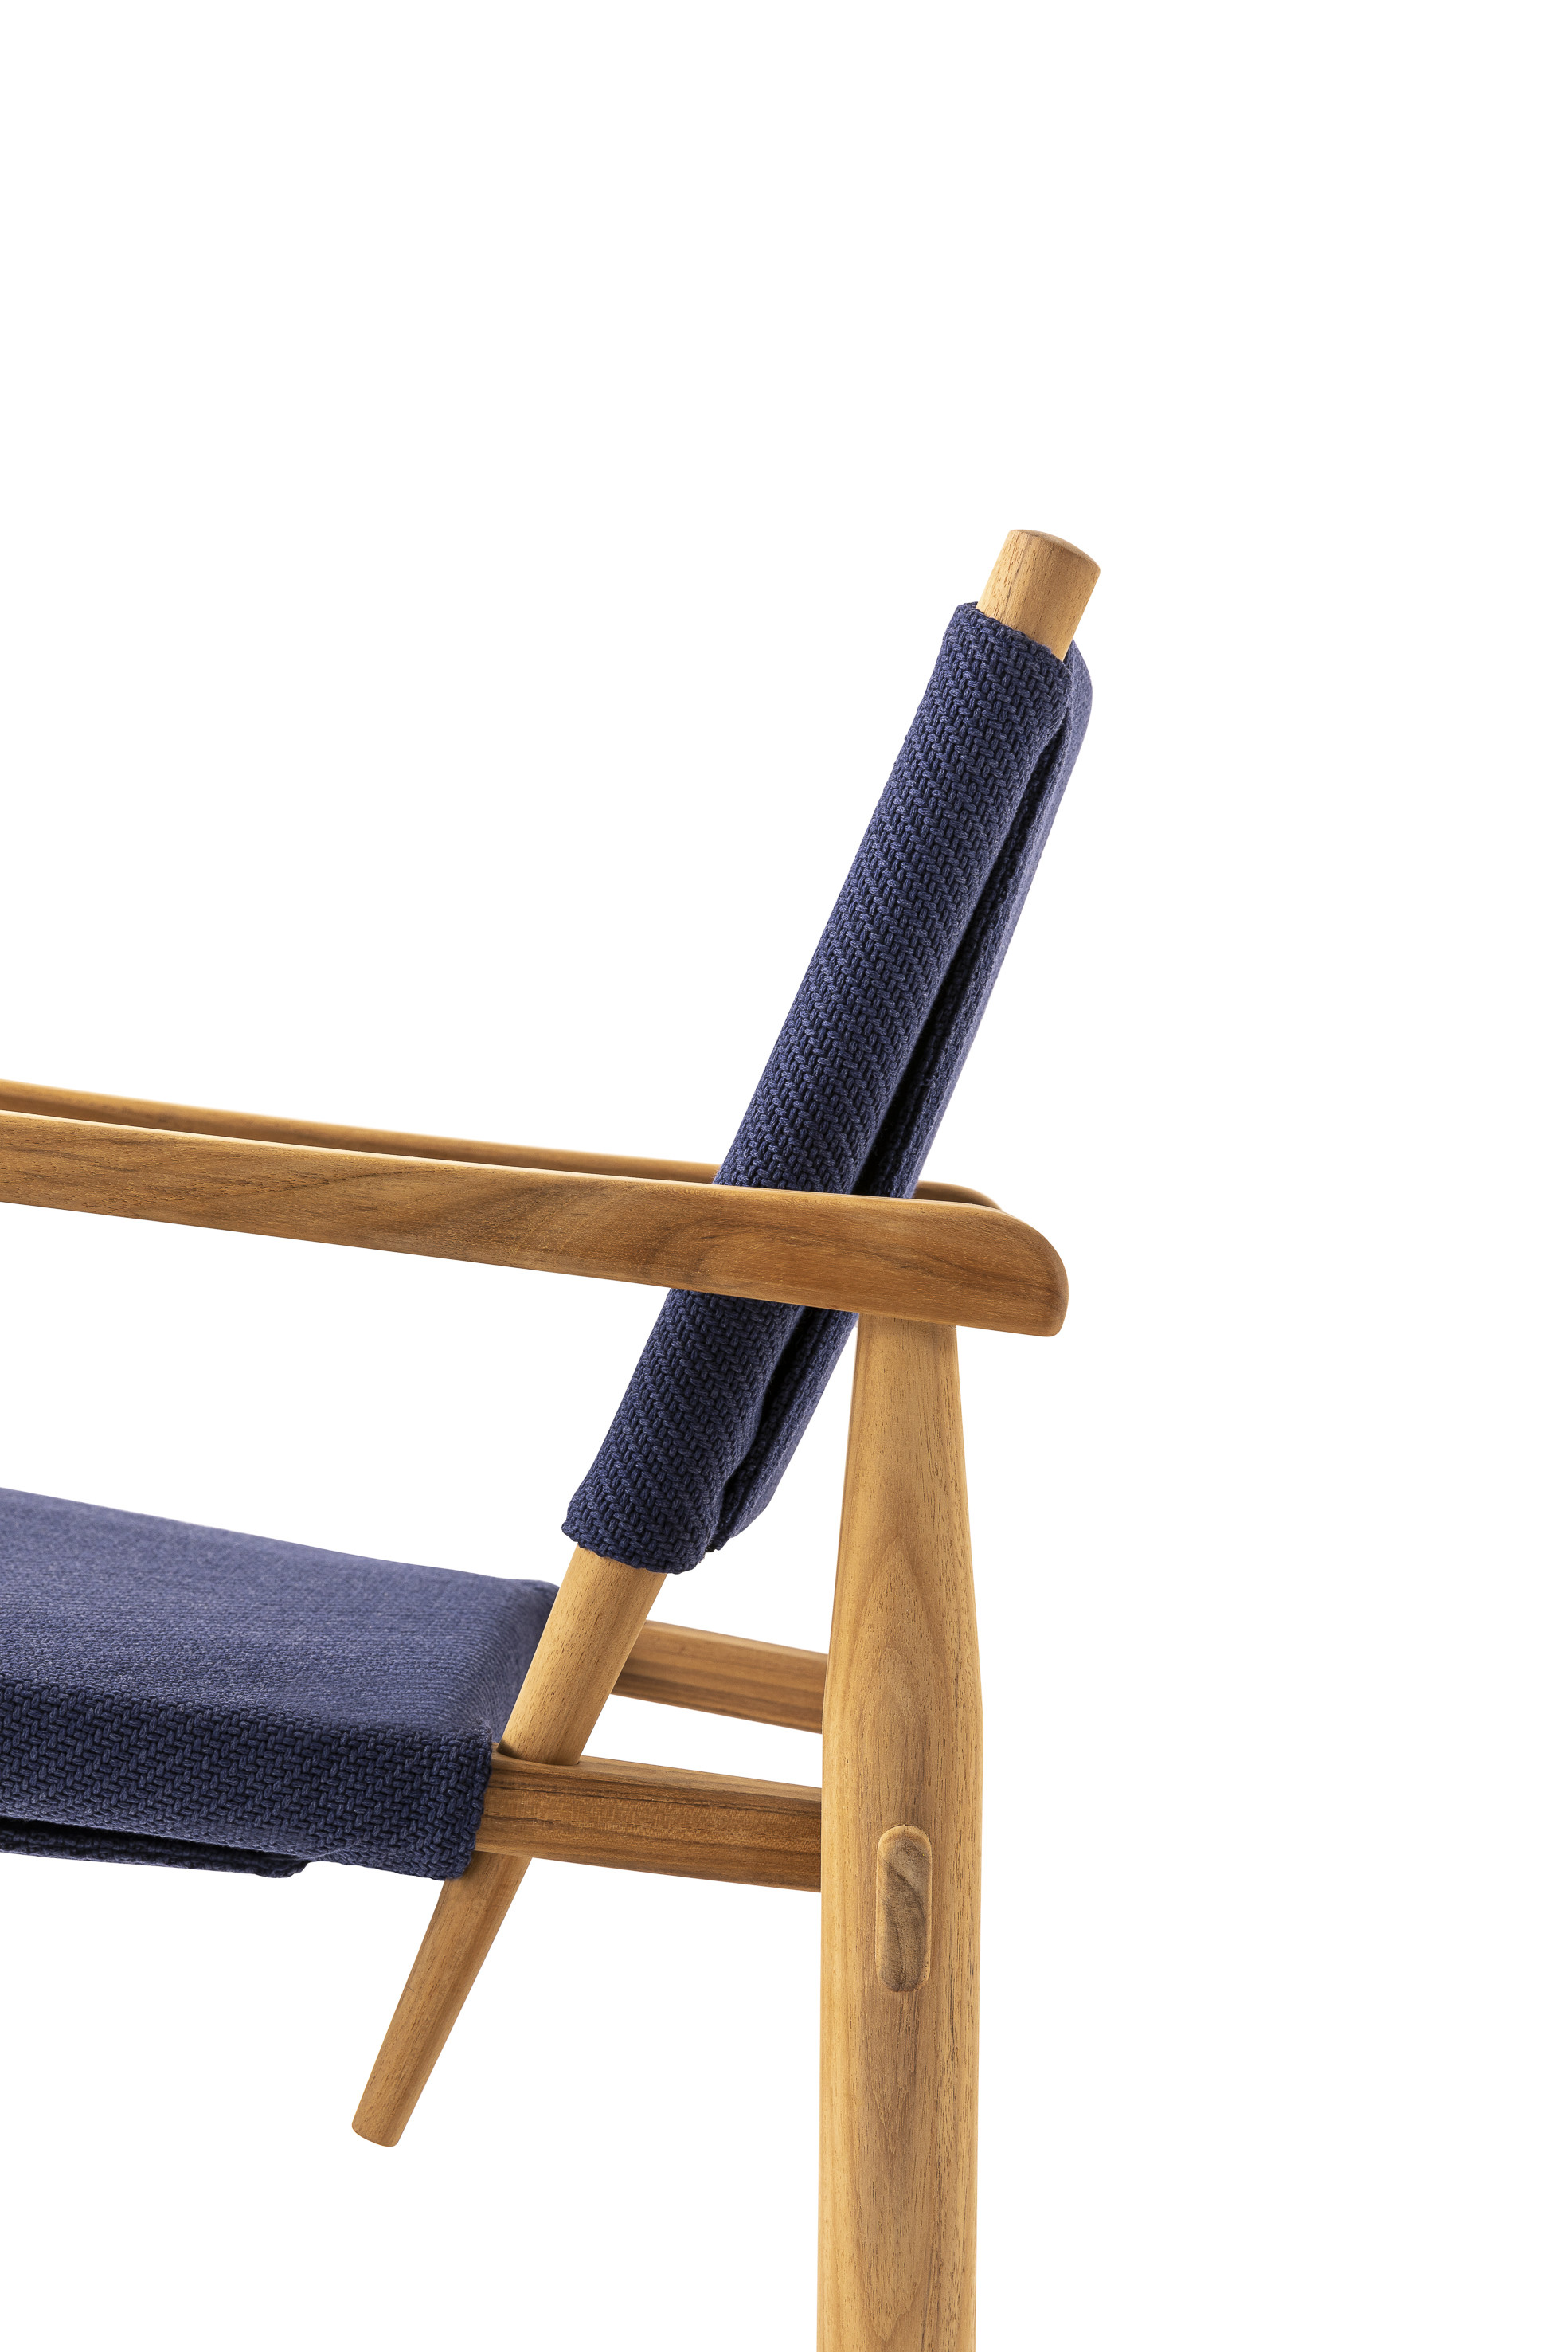 Model 533 Doron Hotel Lounge Chair by Charlotte Perriand for Cassina